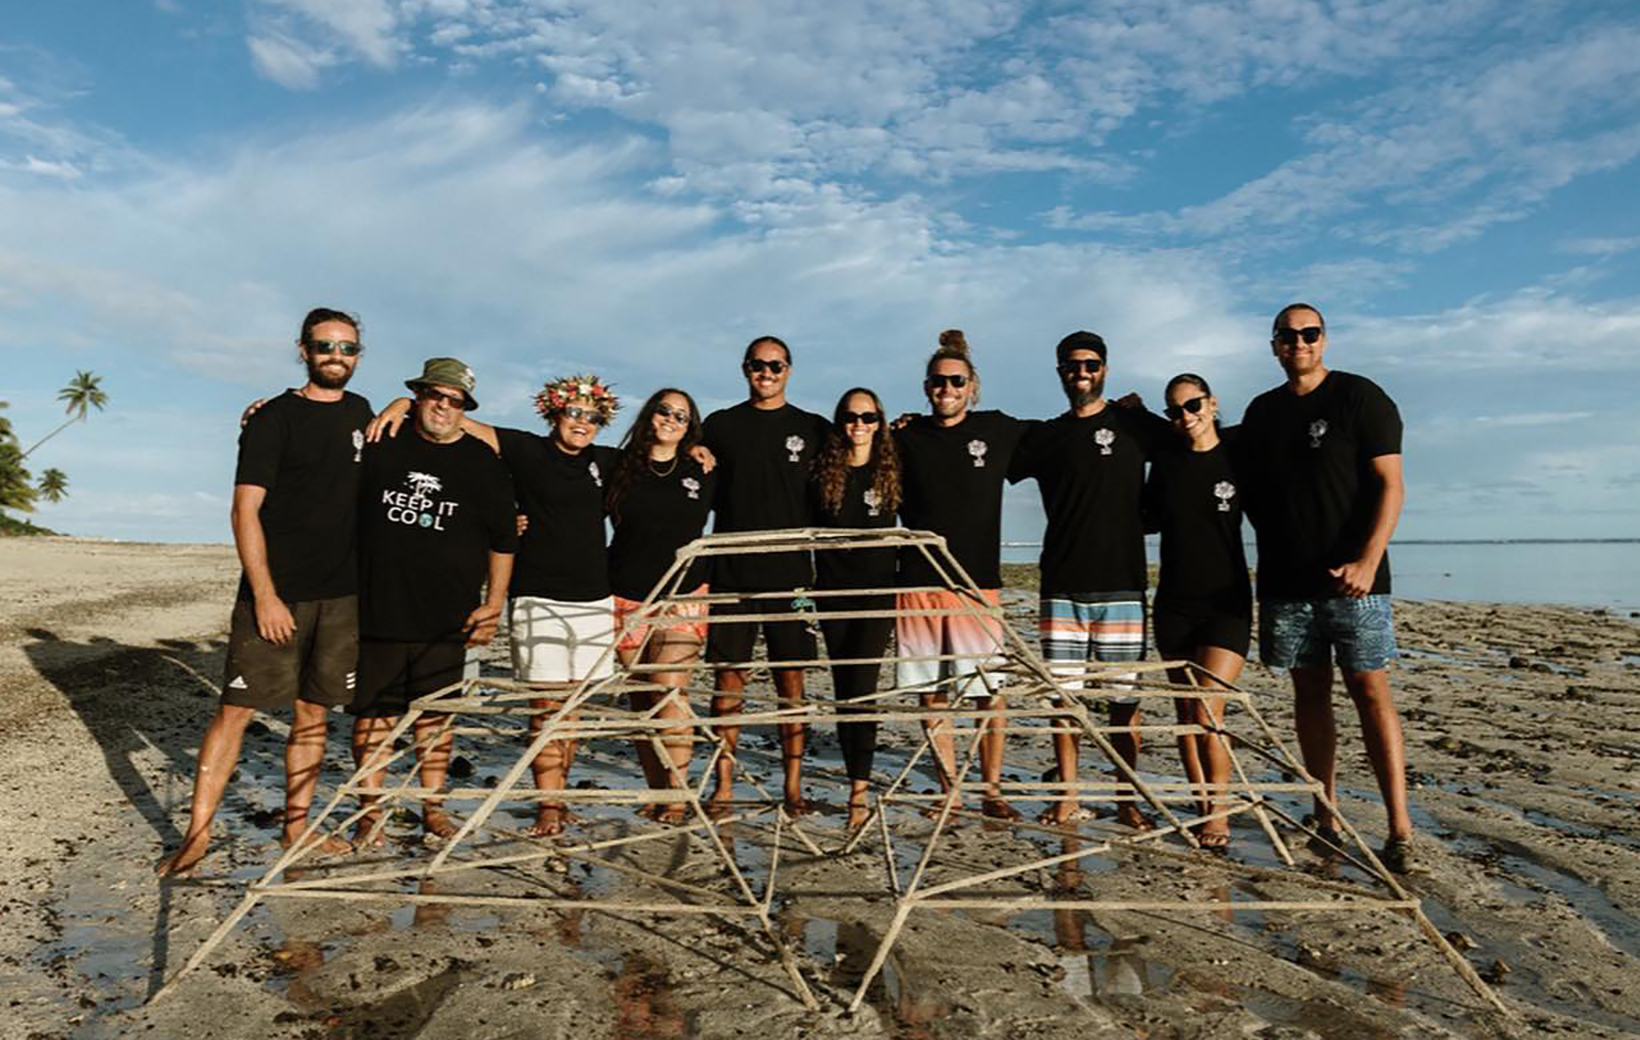 Avaavaroa experience gives  birth to new passion project